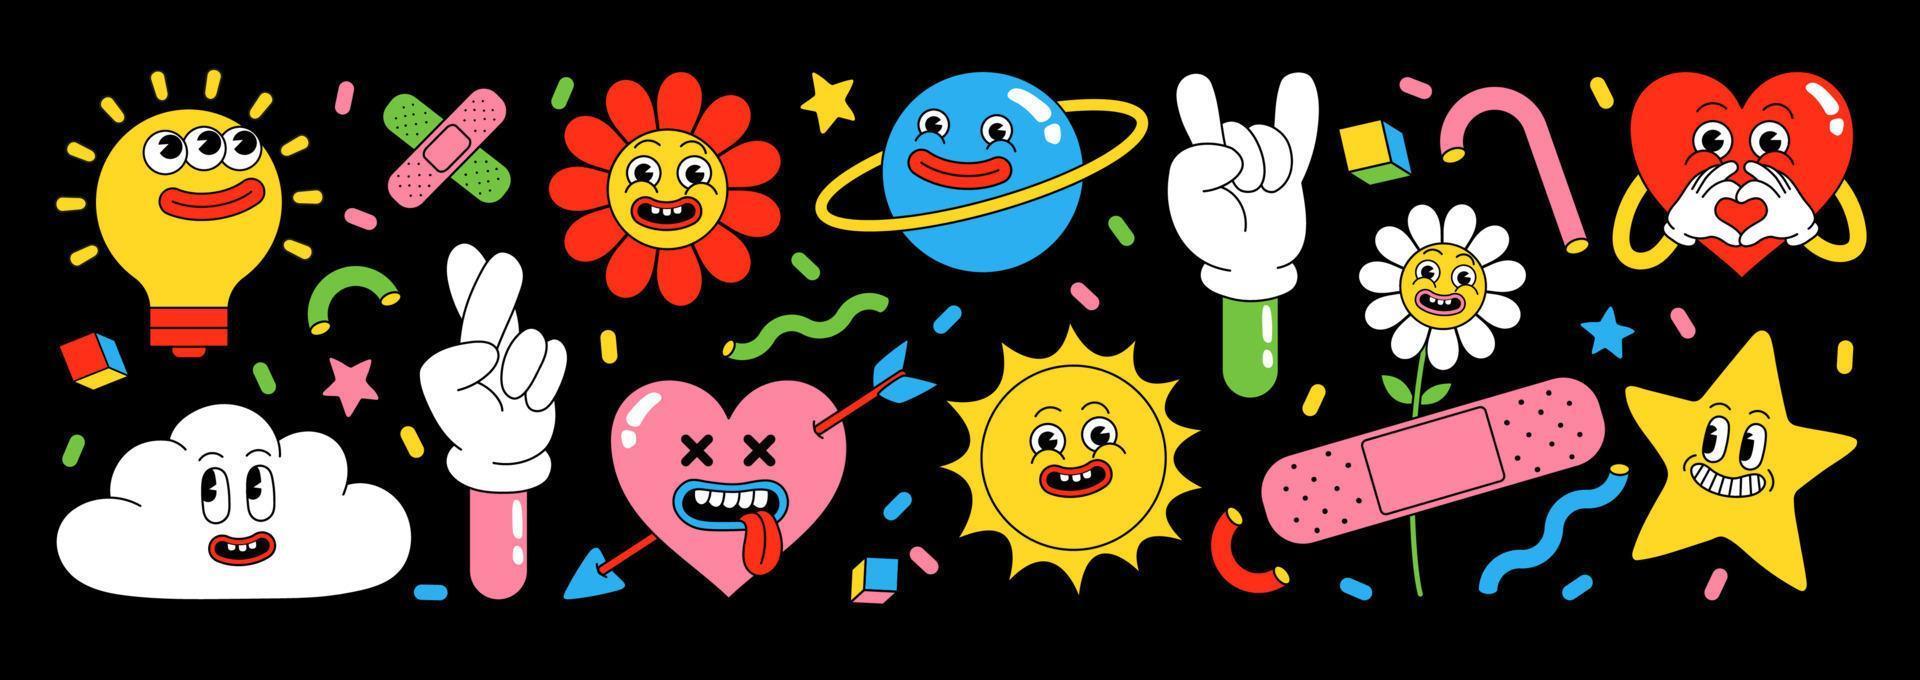 Funny cartoon sticker pack. Heart, sun, planet, berry, abstract faces etc. vector